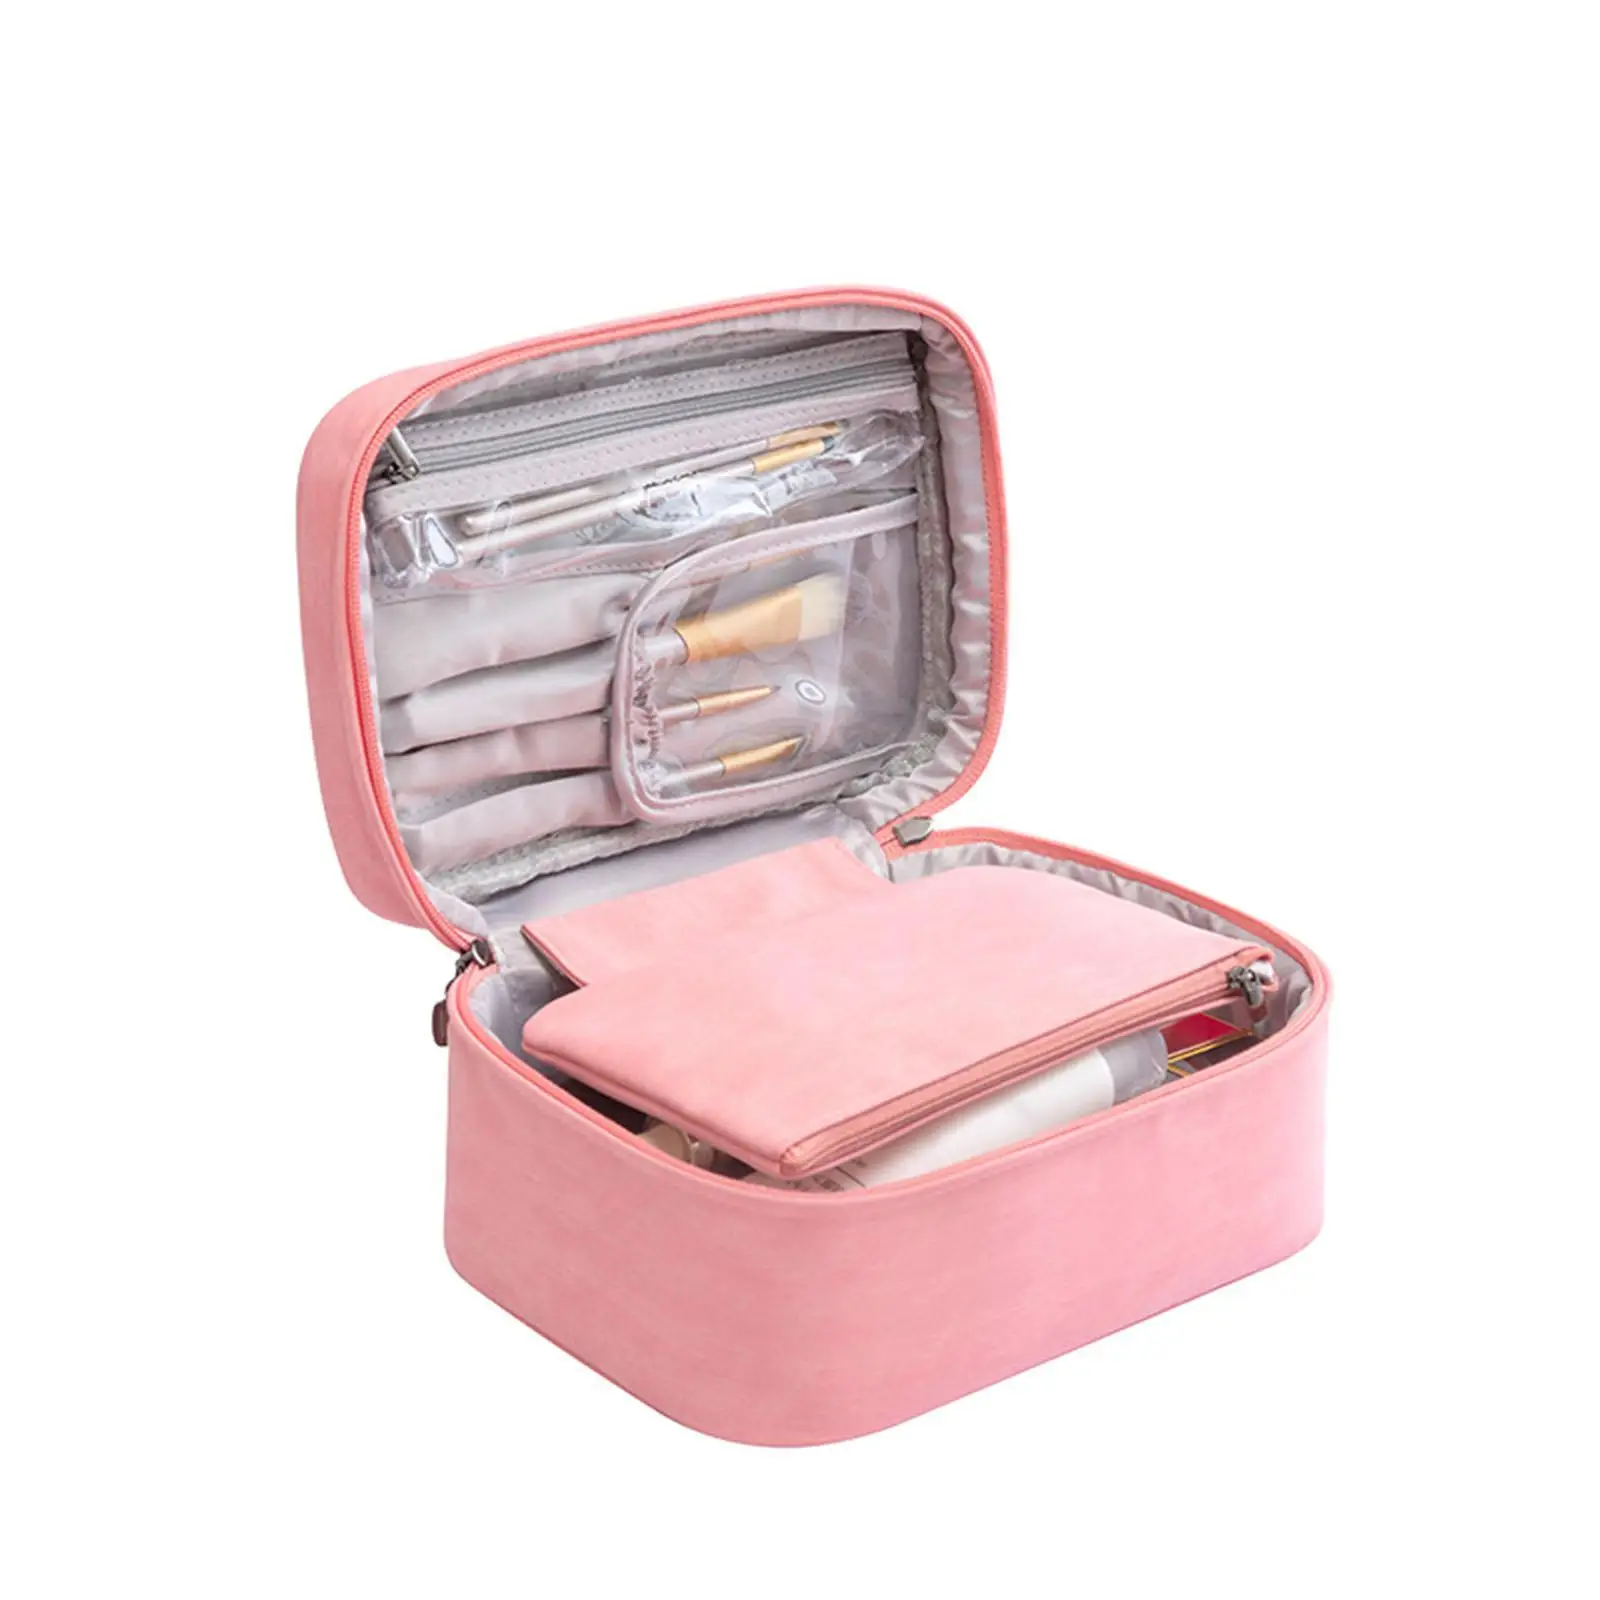 Makeup Organizer Bag with Detachable Pouch Make up Bag Cosmetic Case for Makeup Brush Beauty Eggs Lotion Eye Shadow Lipstick